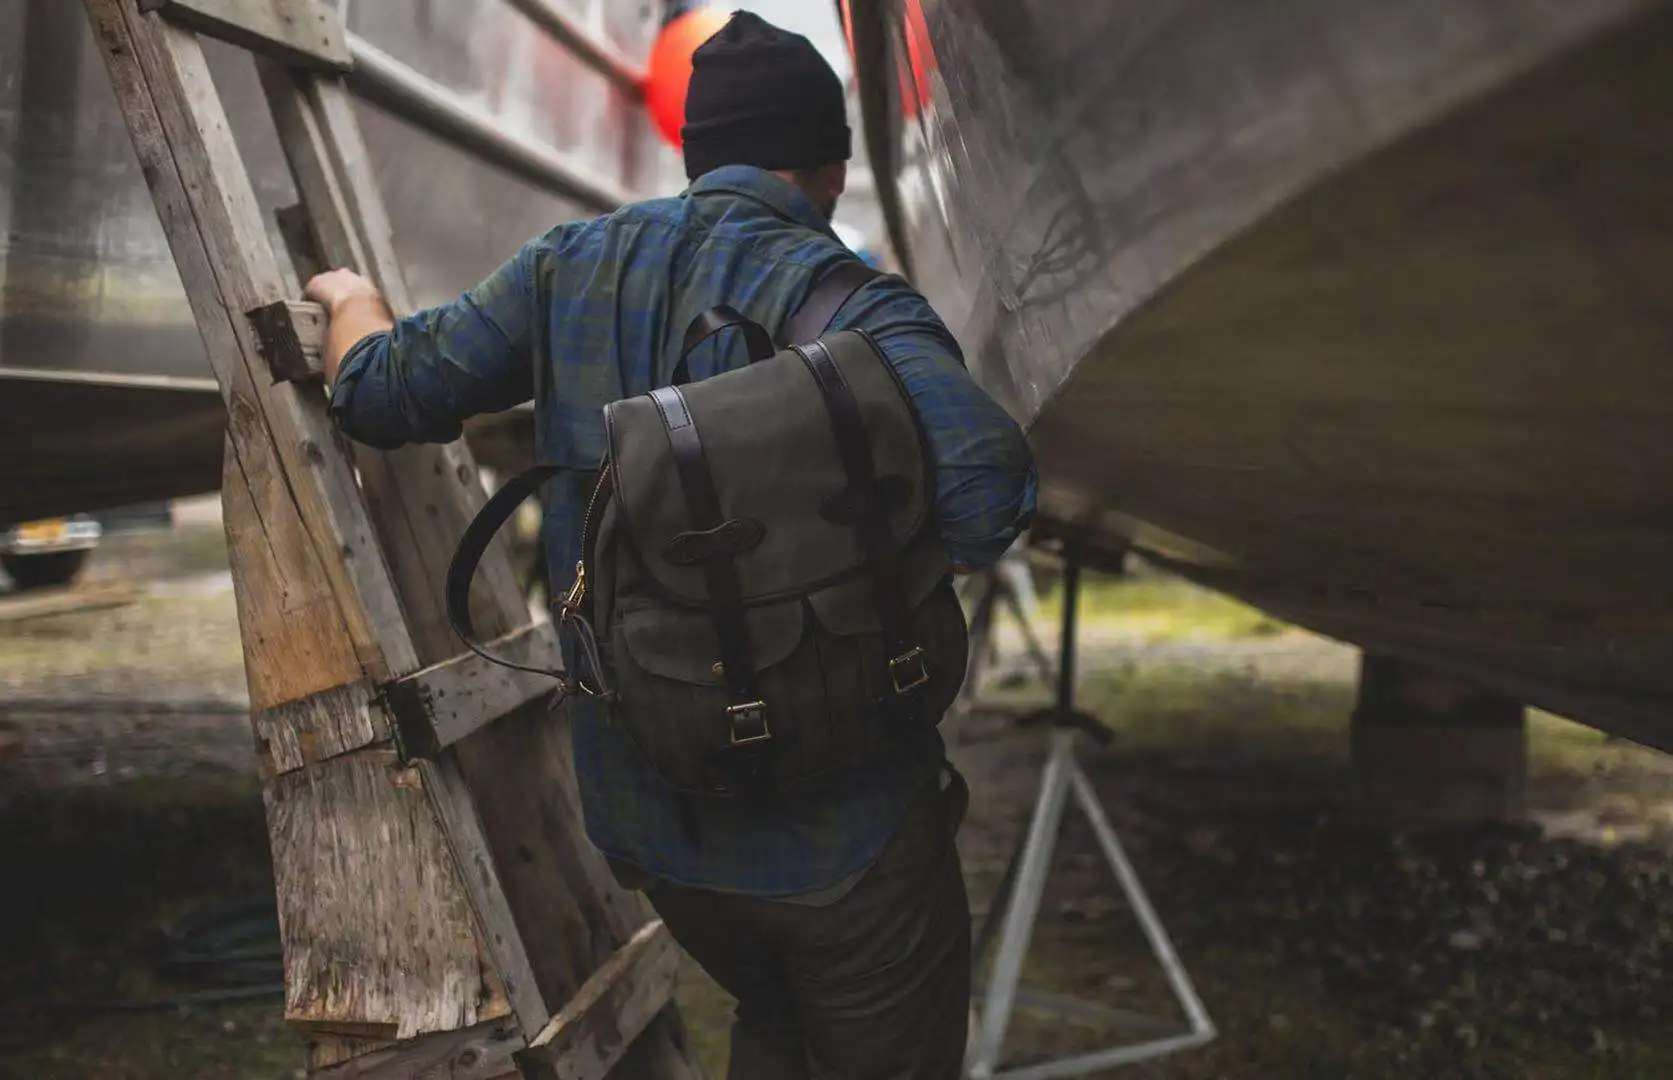 Filson 262 Backpack Imported From The United States, Leather